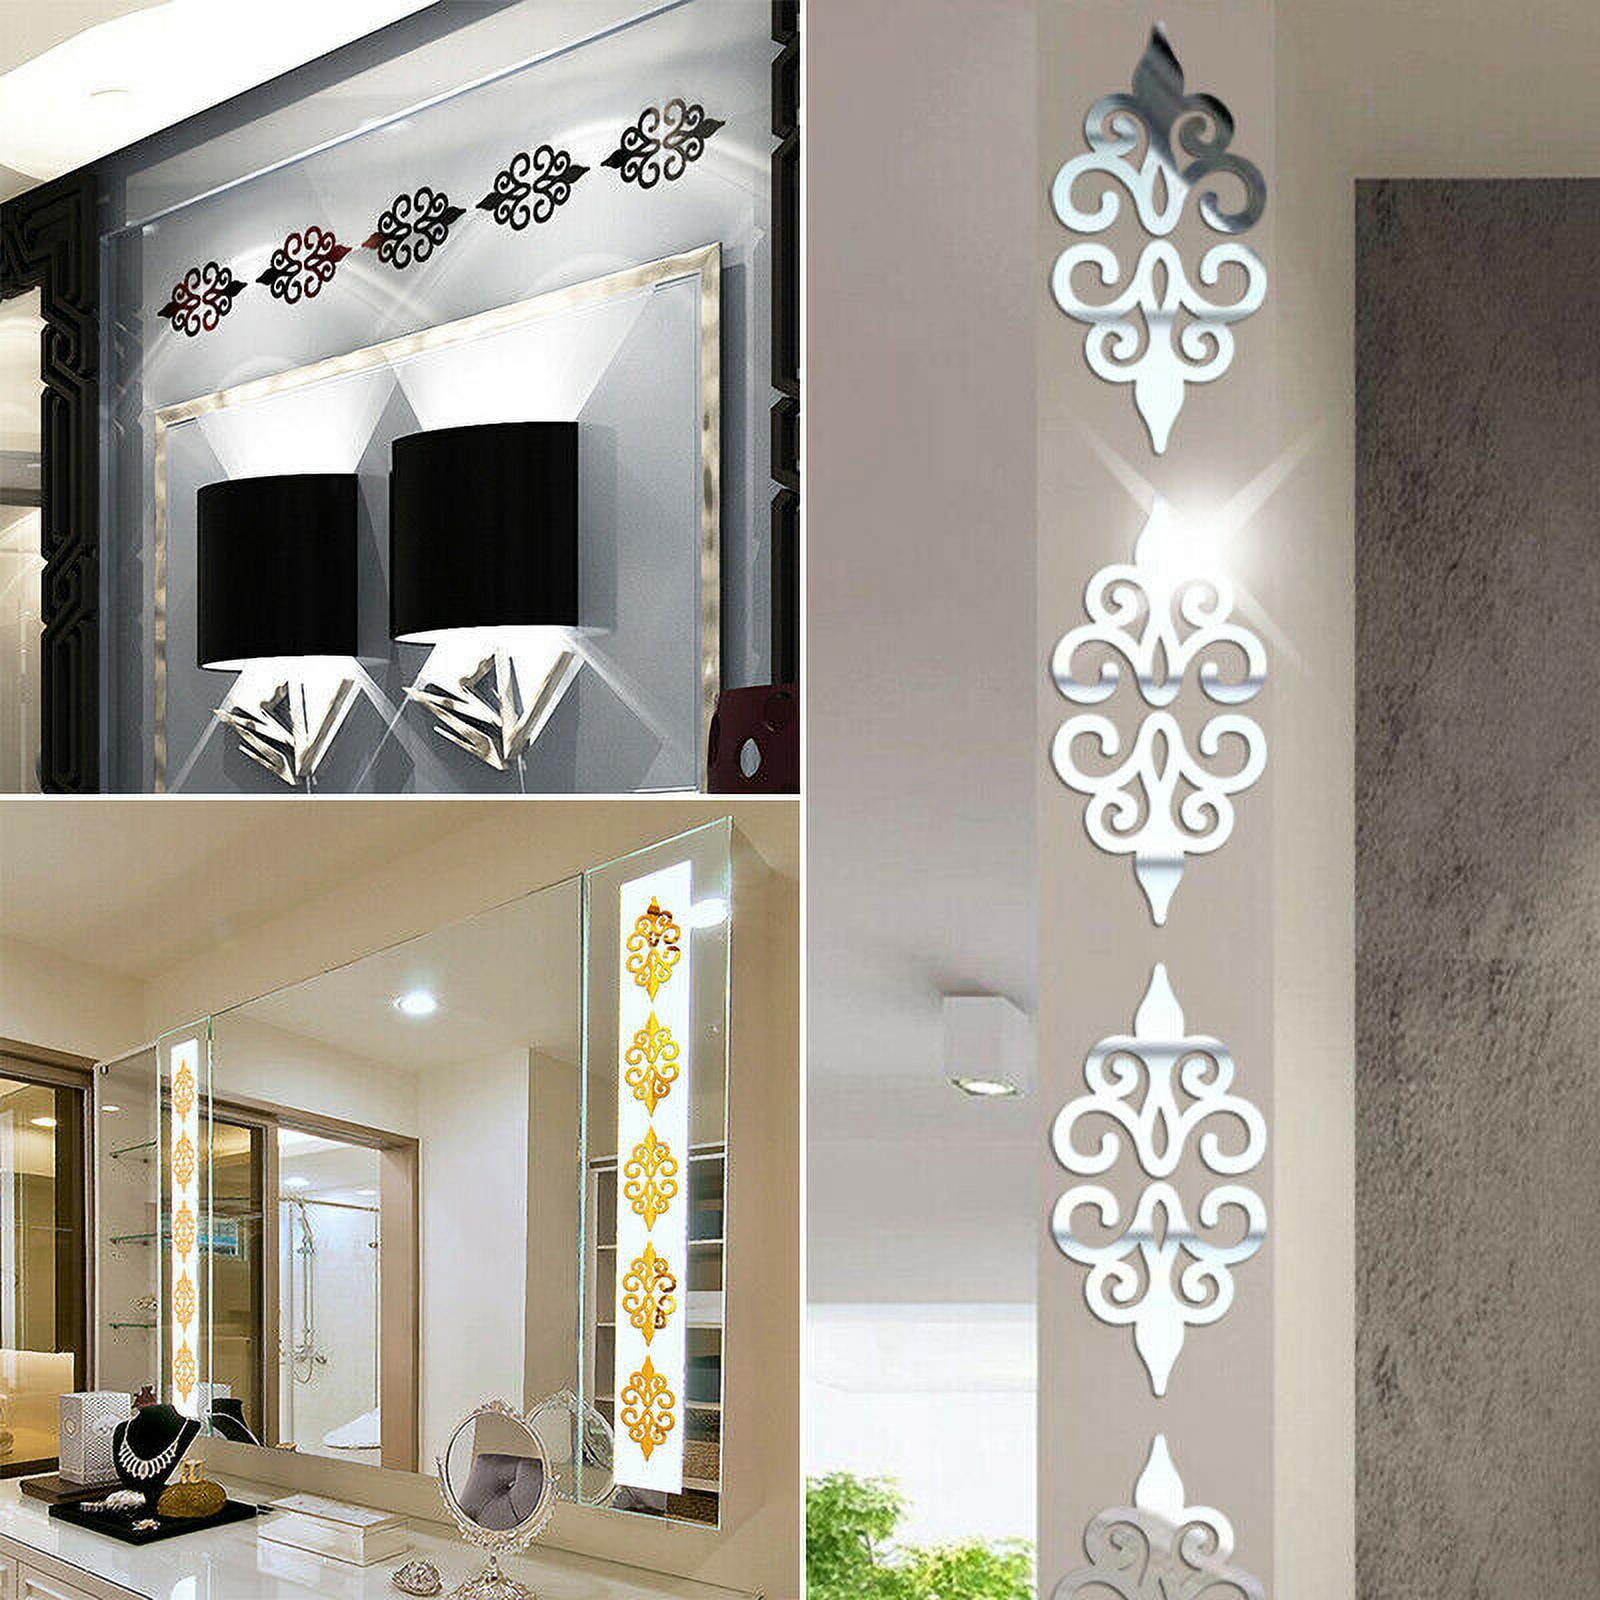 10pcs Multi-size Square Self-adhesive Tiles 3D Mirror Wall Stickers Wall Decor 